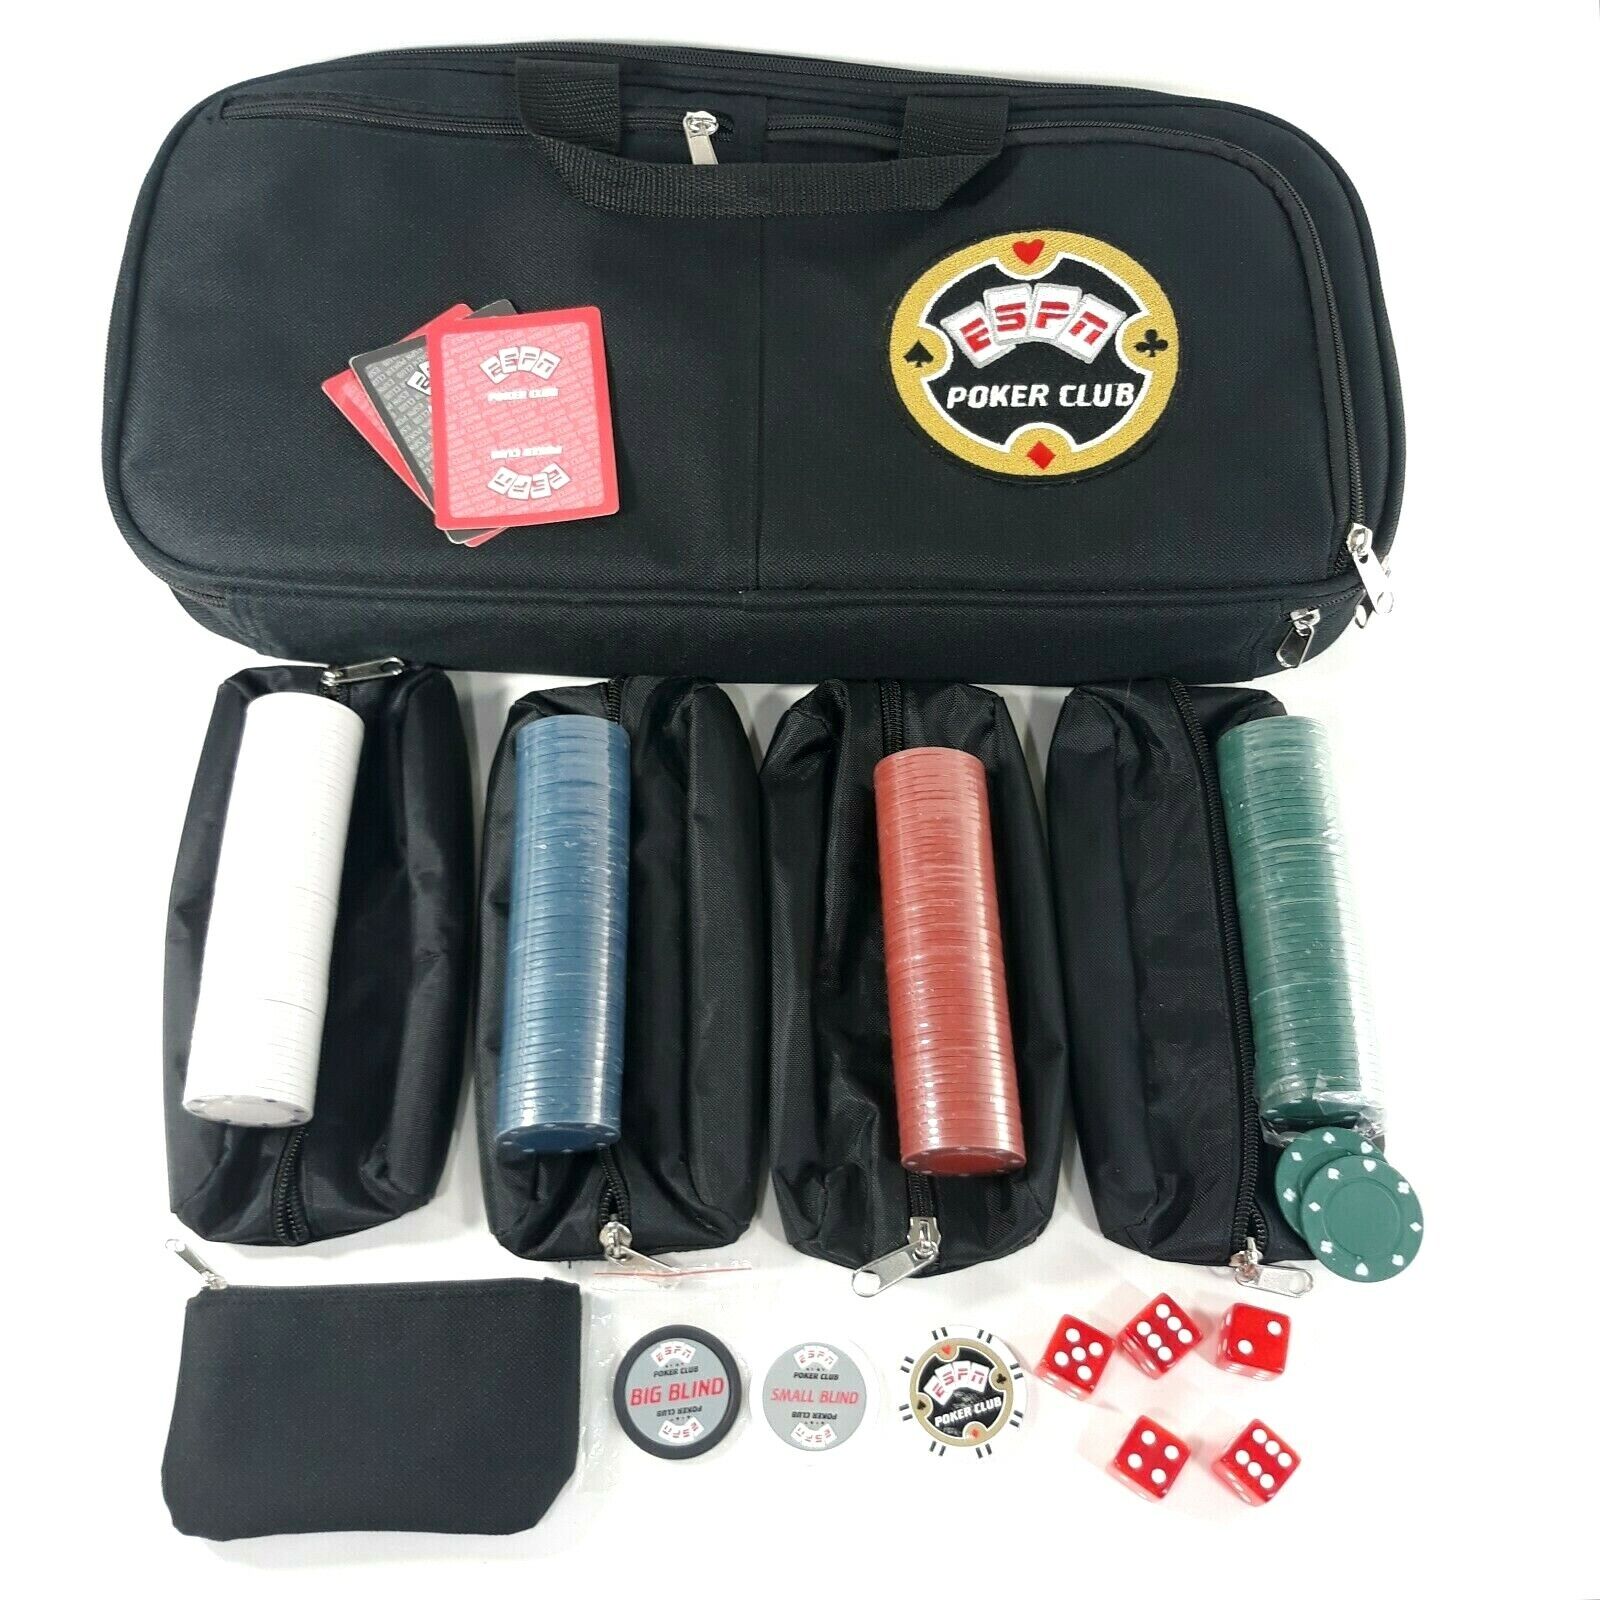 ESPN Poker Club Set Backpack Carry Case with Blind Chips and Dice No Card Deck